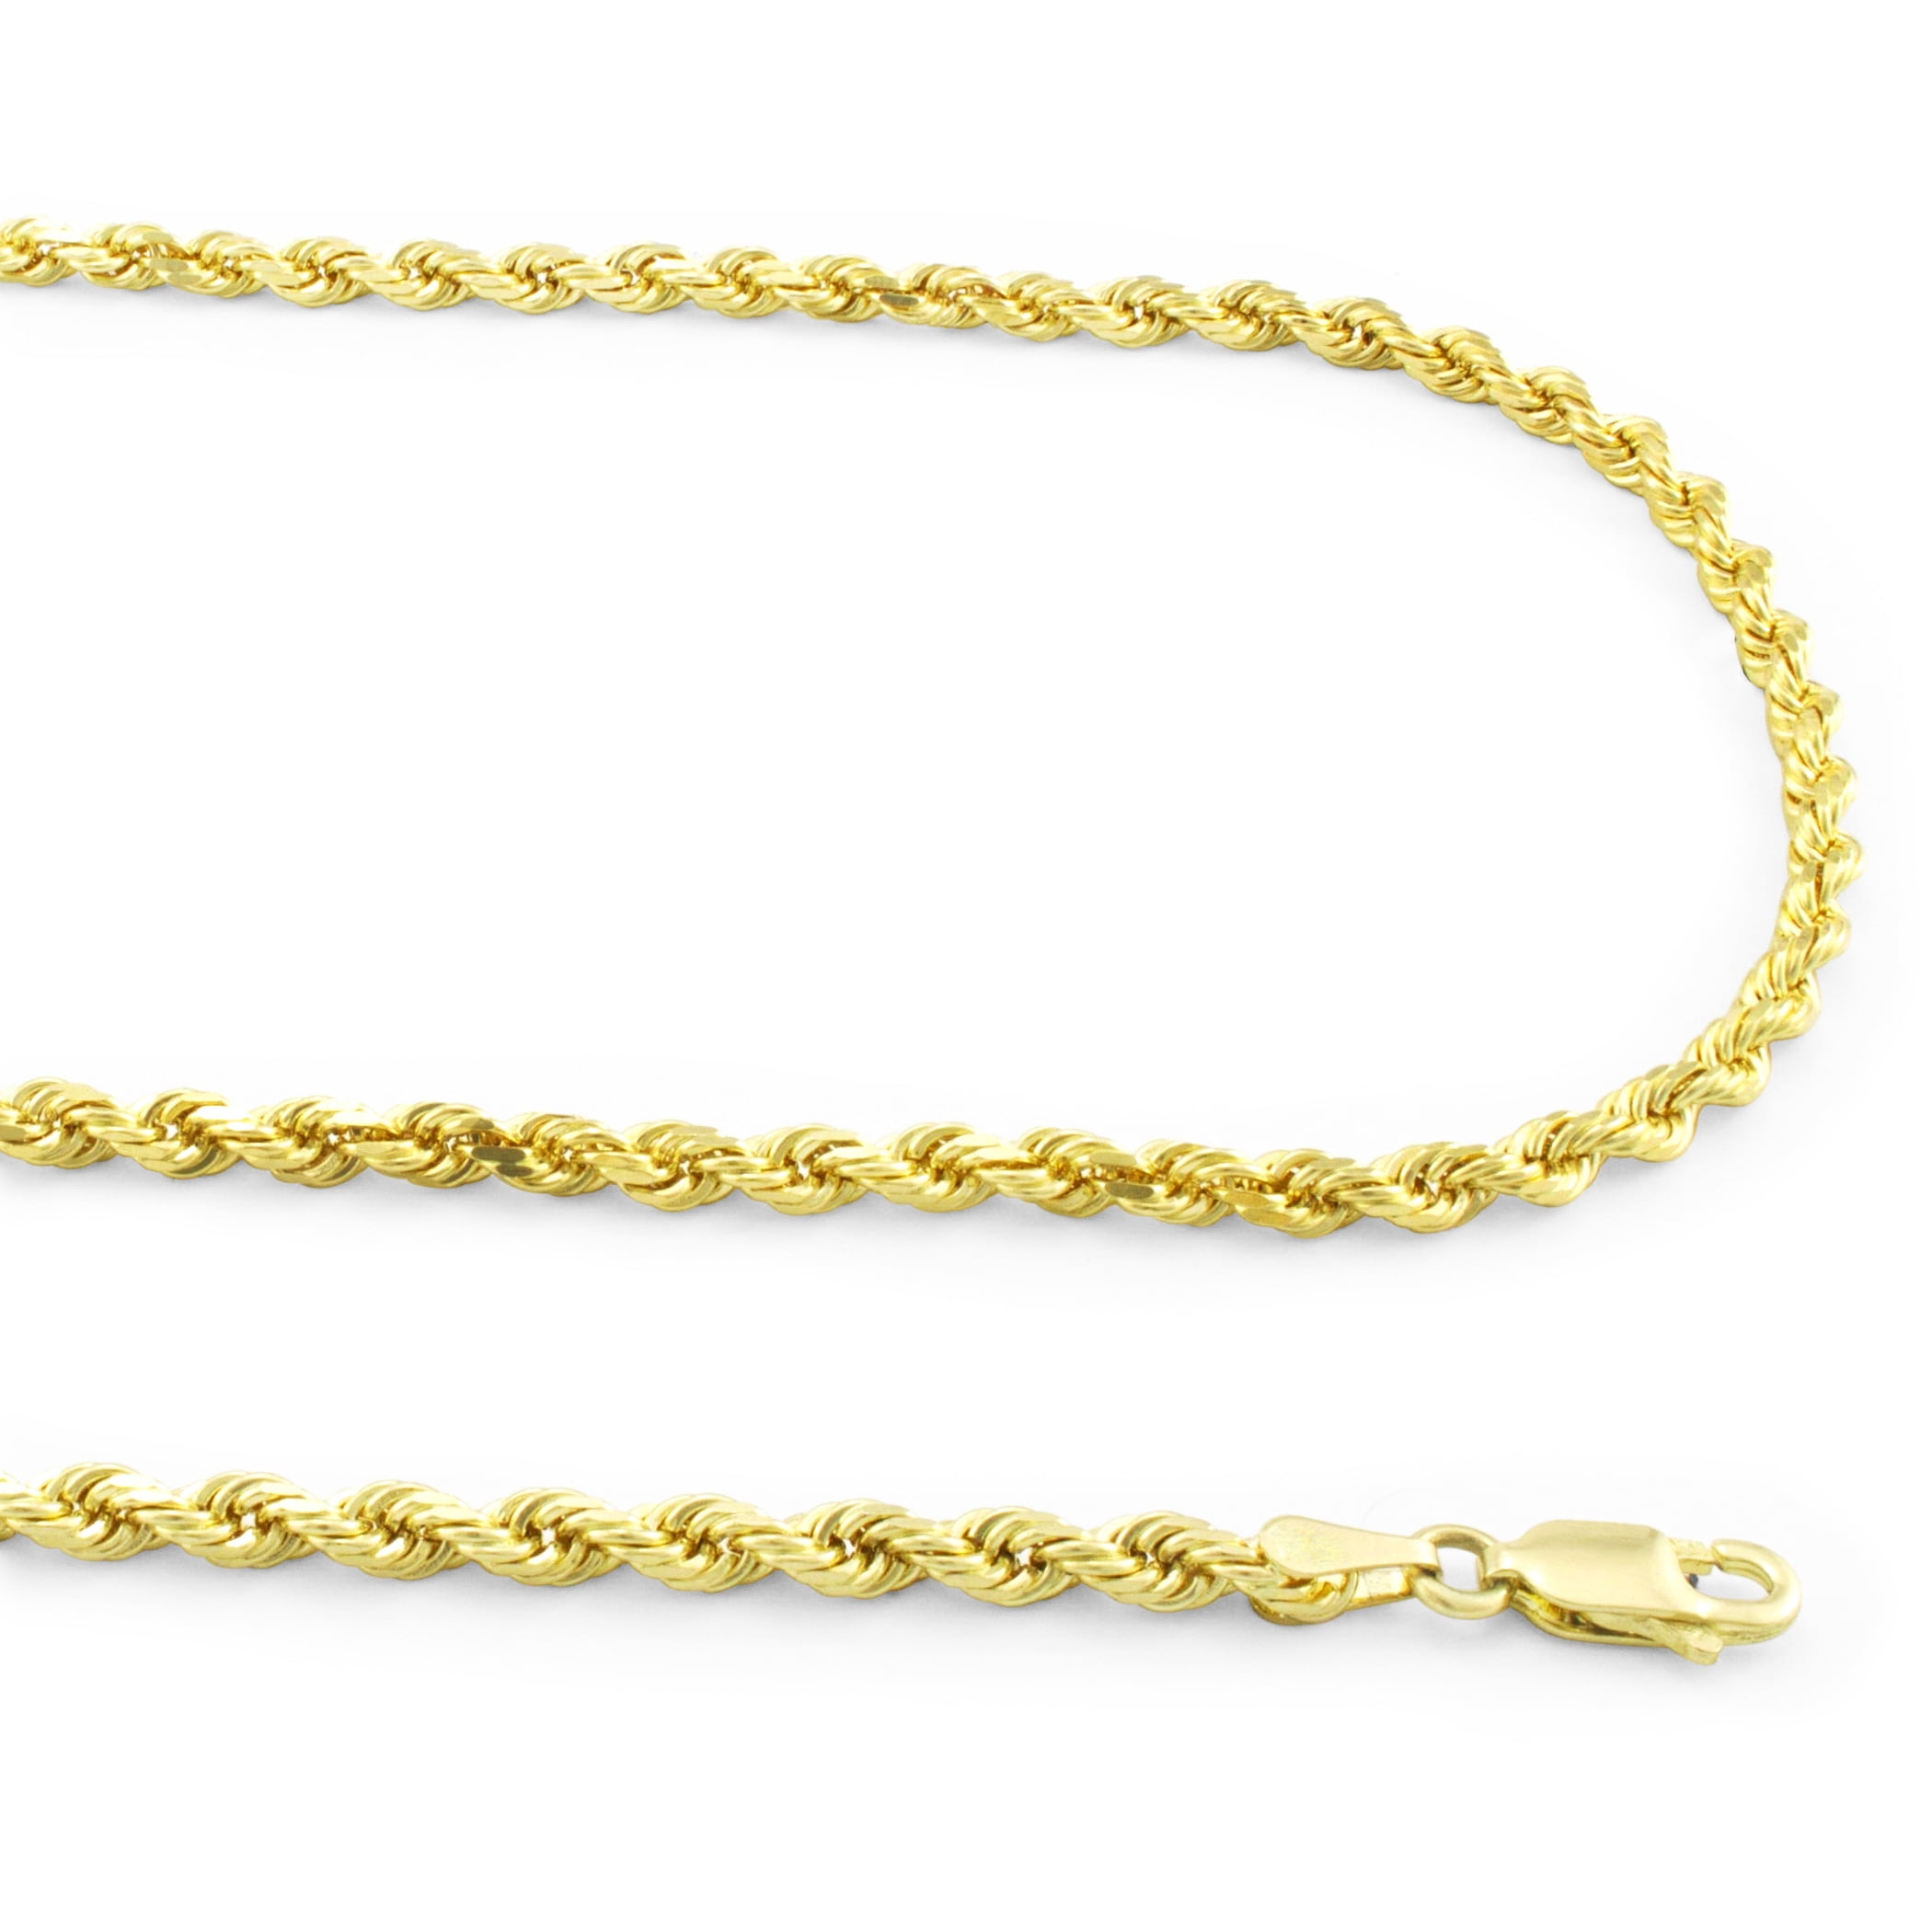 26" 10K Yellow White or Rose Gold Womens 1.5mm Rope Chain Pendant Necklace 14" 